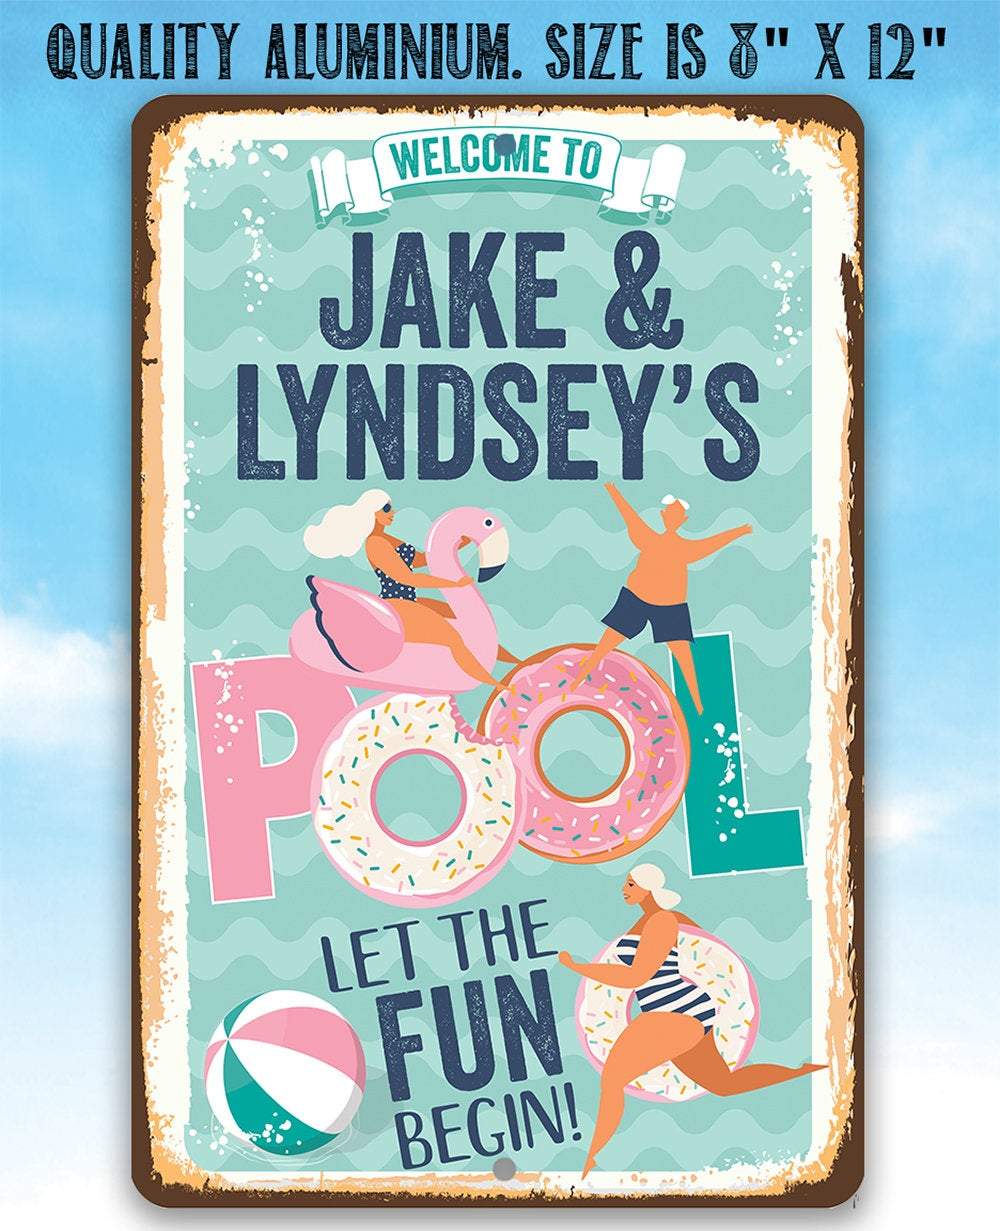 Personalized - Welcome To Our Pool Let the Fun Begin - Metal Sign | Lone Star Art.